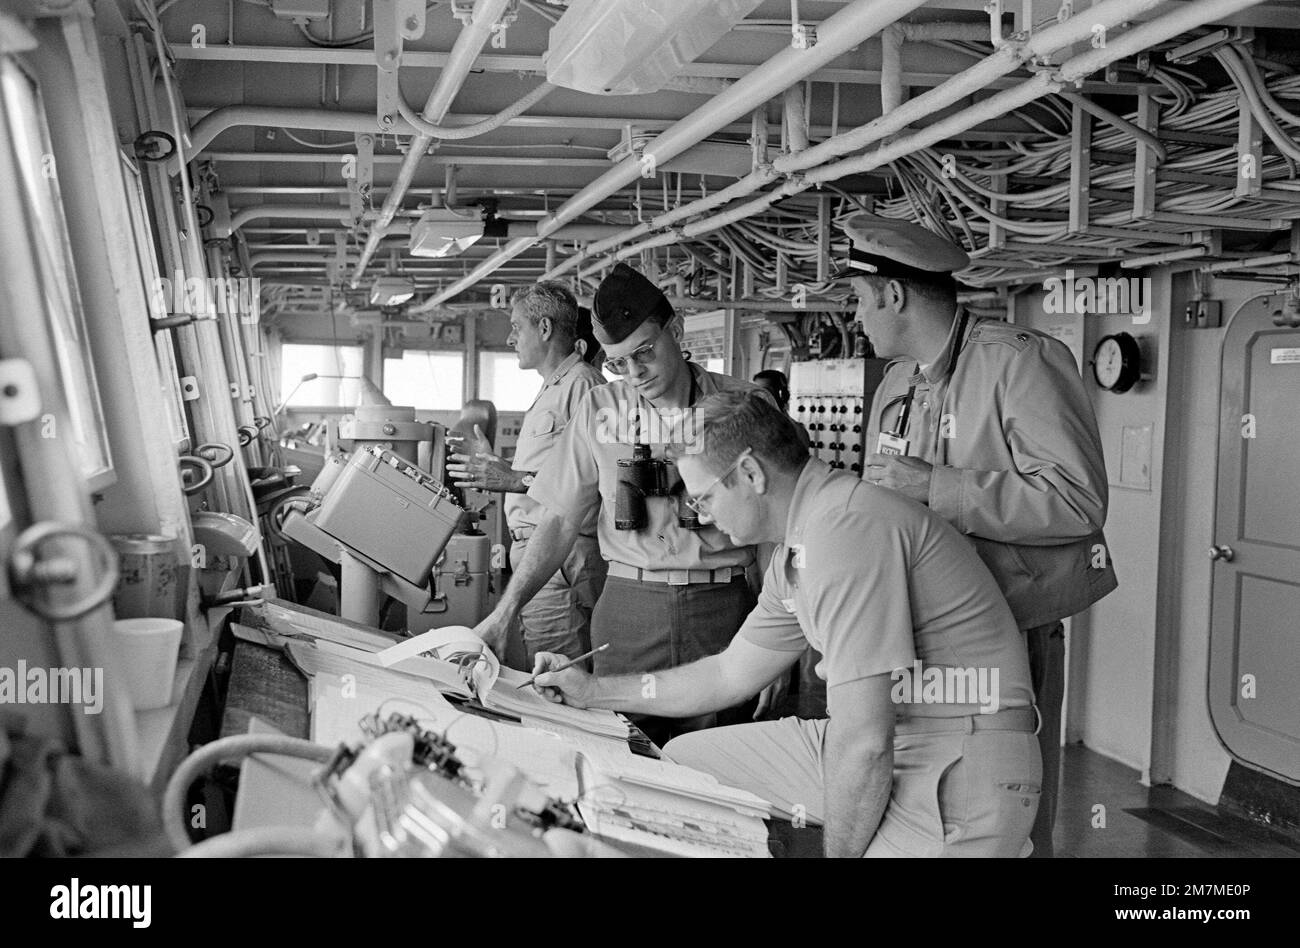 Rear Admiral Frederick F. Palmer, rear, Commander Amphibious Group Two, talks to crewman on the bridge of the amphibious command ship USS MOUNT WHINTEY (LCC 20) while en route to participate in the allied Exercise TEAM WORK '76. The MOUNT WHITNEY is serving as flagship during the exercise scheduled for September 15-24. Subject Operation/Series: TEAM WORK '76 Country: Unknown Stock Photo